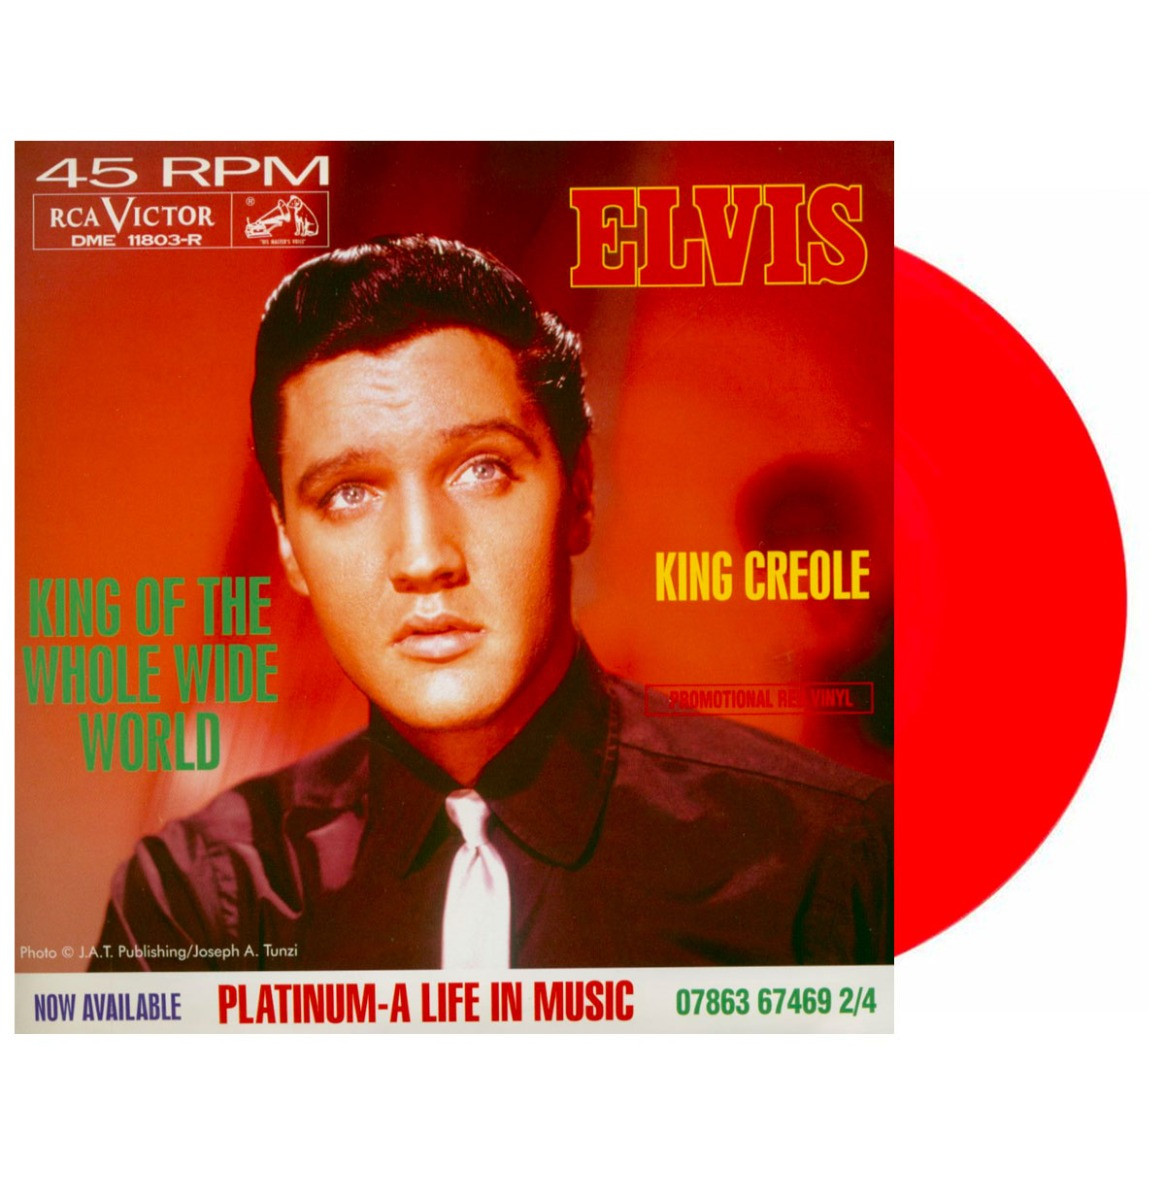 Single: Elvis Presley - The King Of The Whole Wide World/ King Creole (Rood Vinyl)